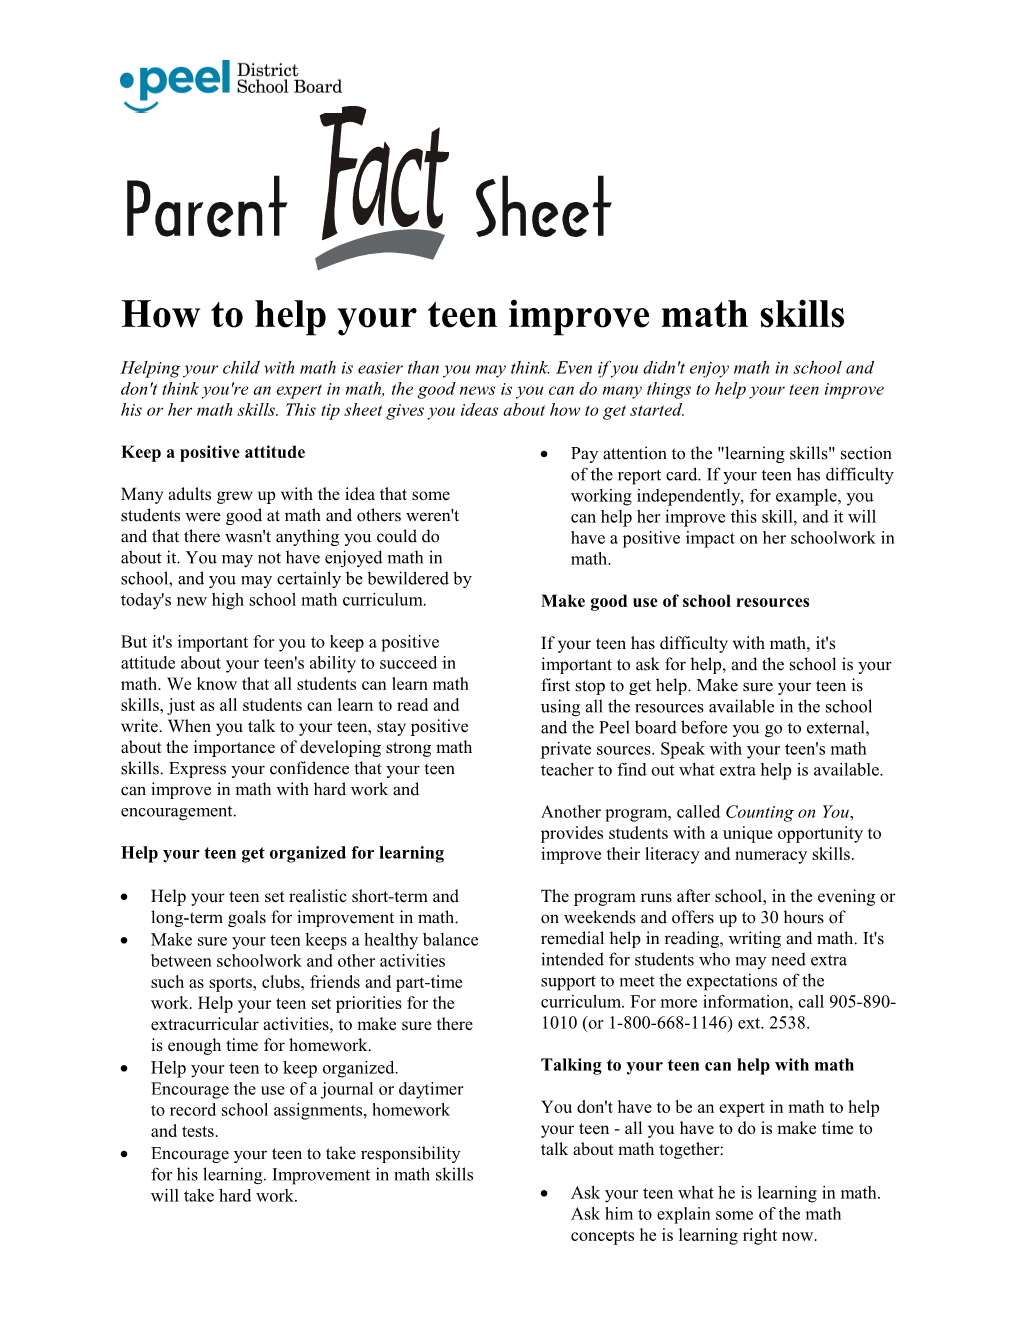 Tip Sheet for Students to Help with Mathematics